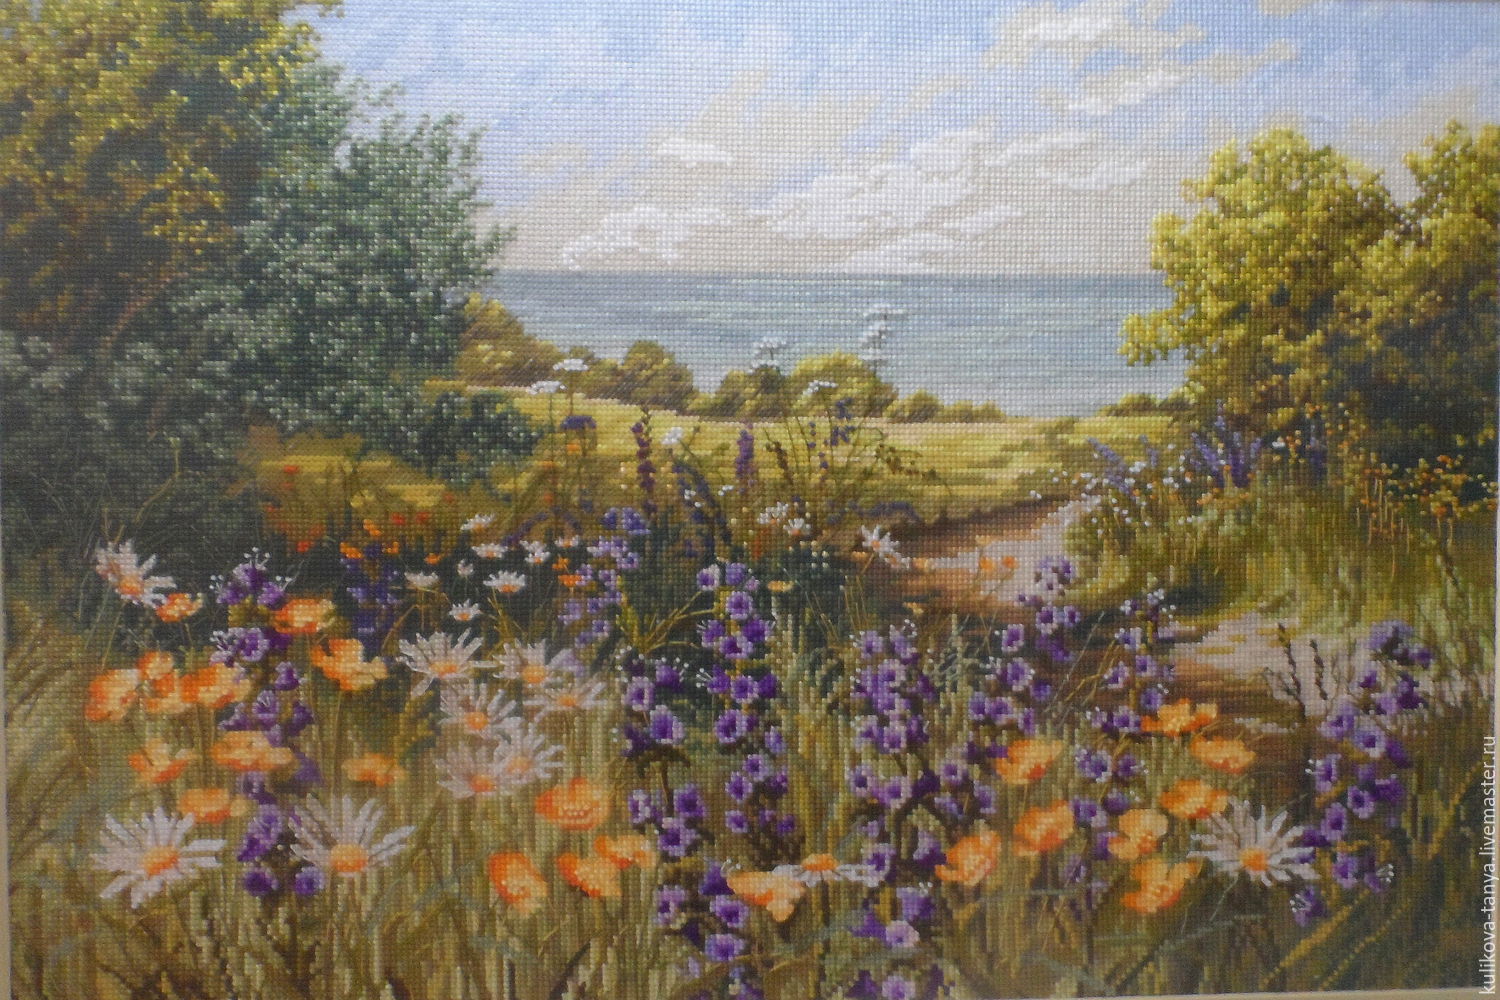 Embroidered picture of the Path to the sea hand embroidery cross stitch landscape meadow flowers meadow grass bells chamomile lavender summer sea for the soul romantic memories of childhood